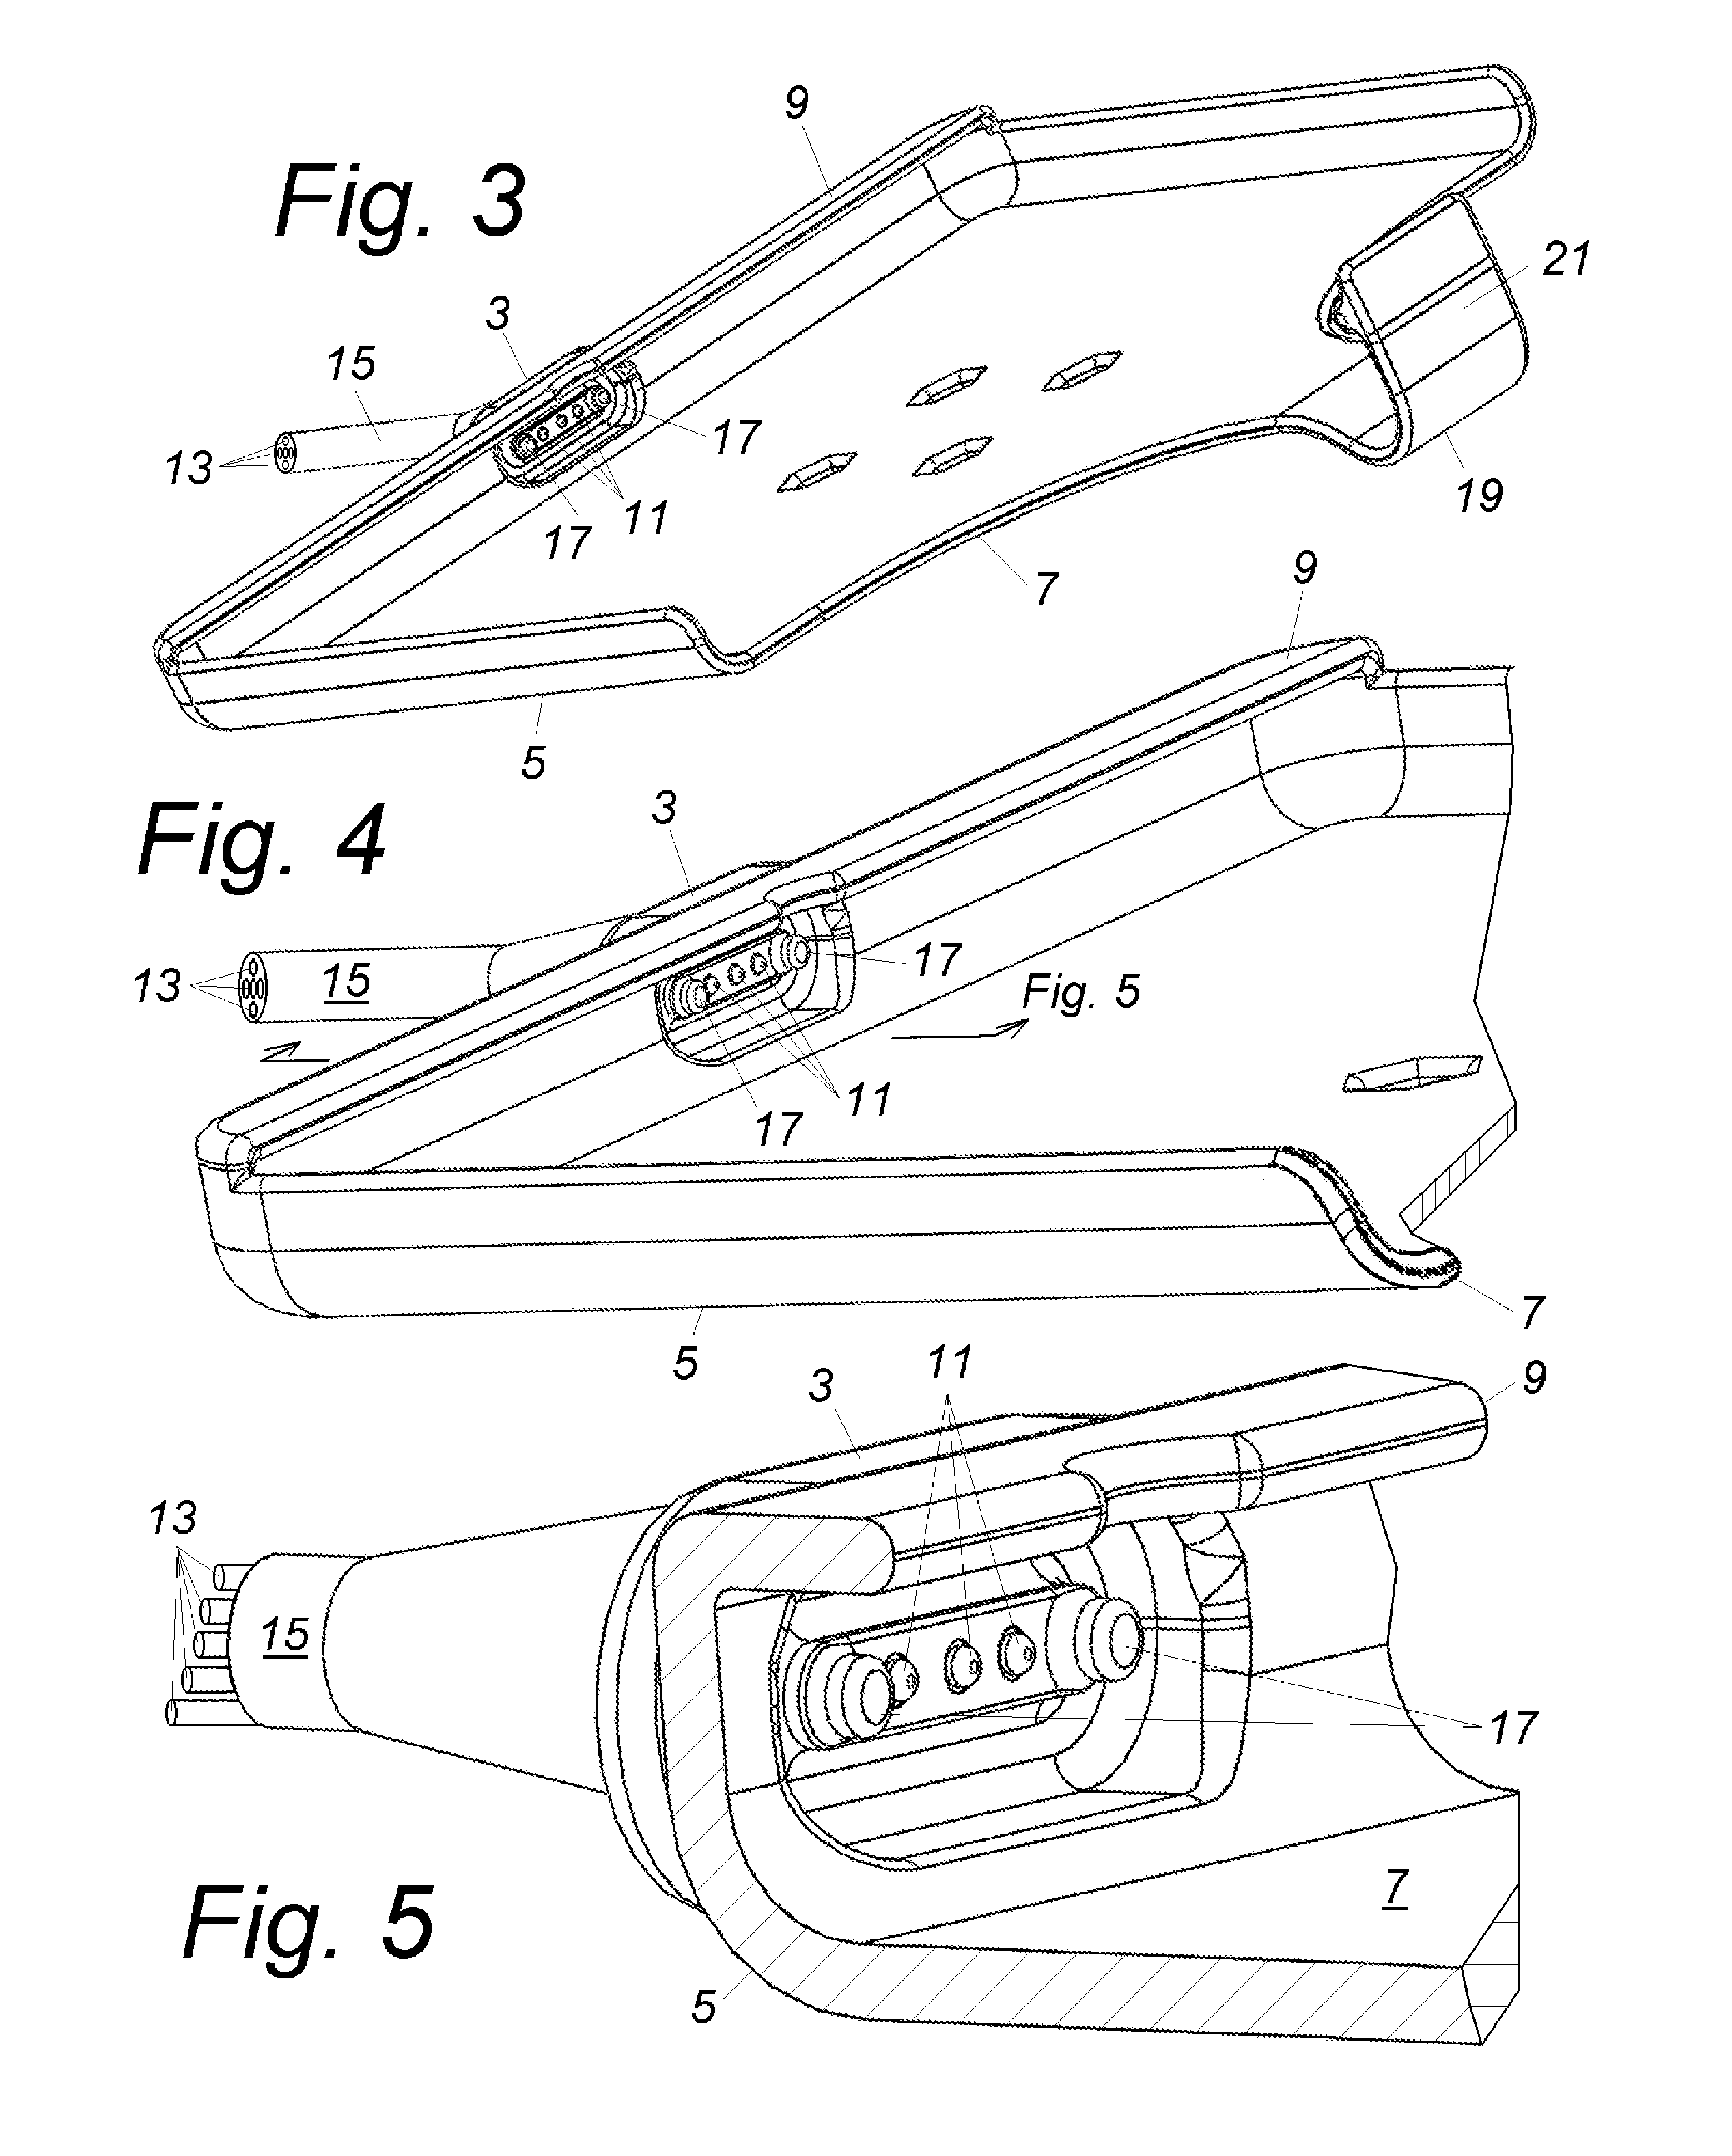 Docking sleeve with electrical adapter